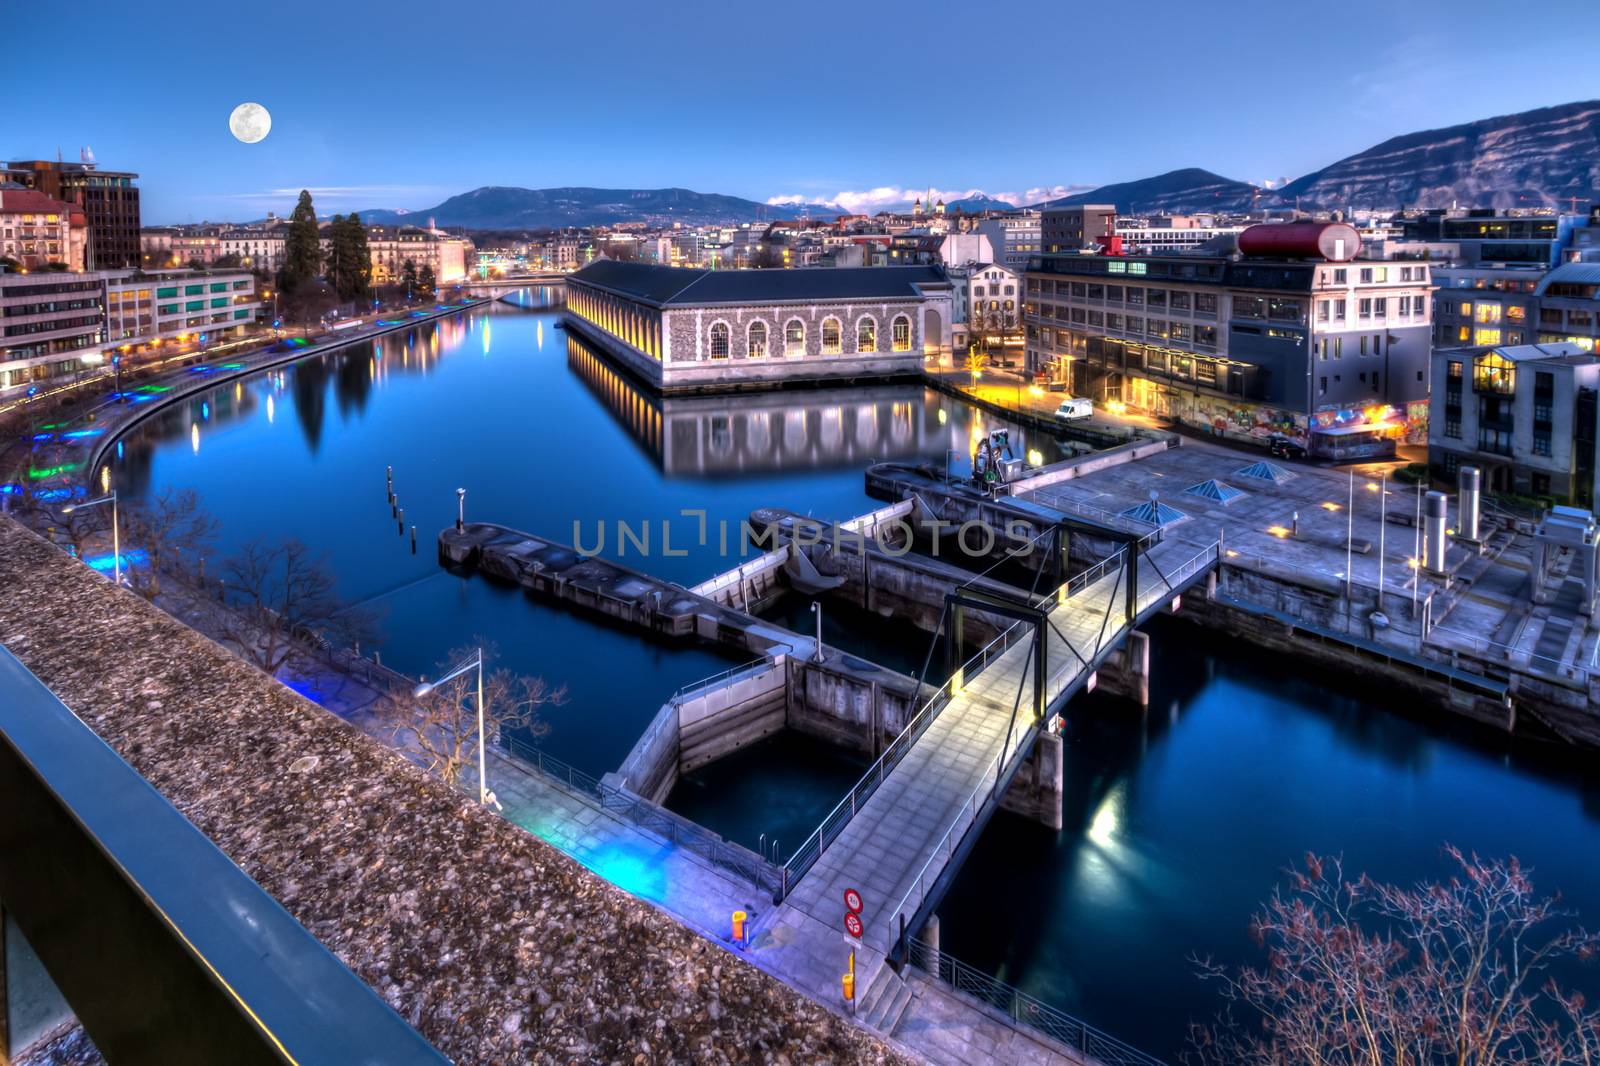 BFM, cathedral tower and Rhone river, Geneva, Switzerland, HDR by Elenaphotos21